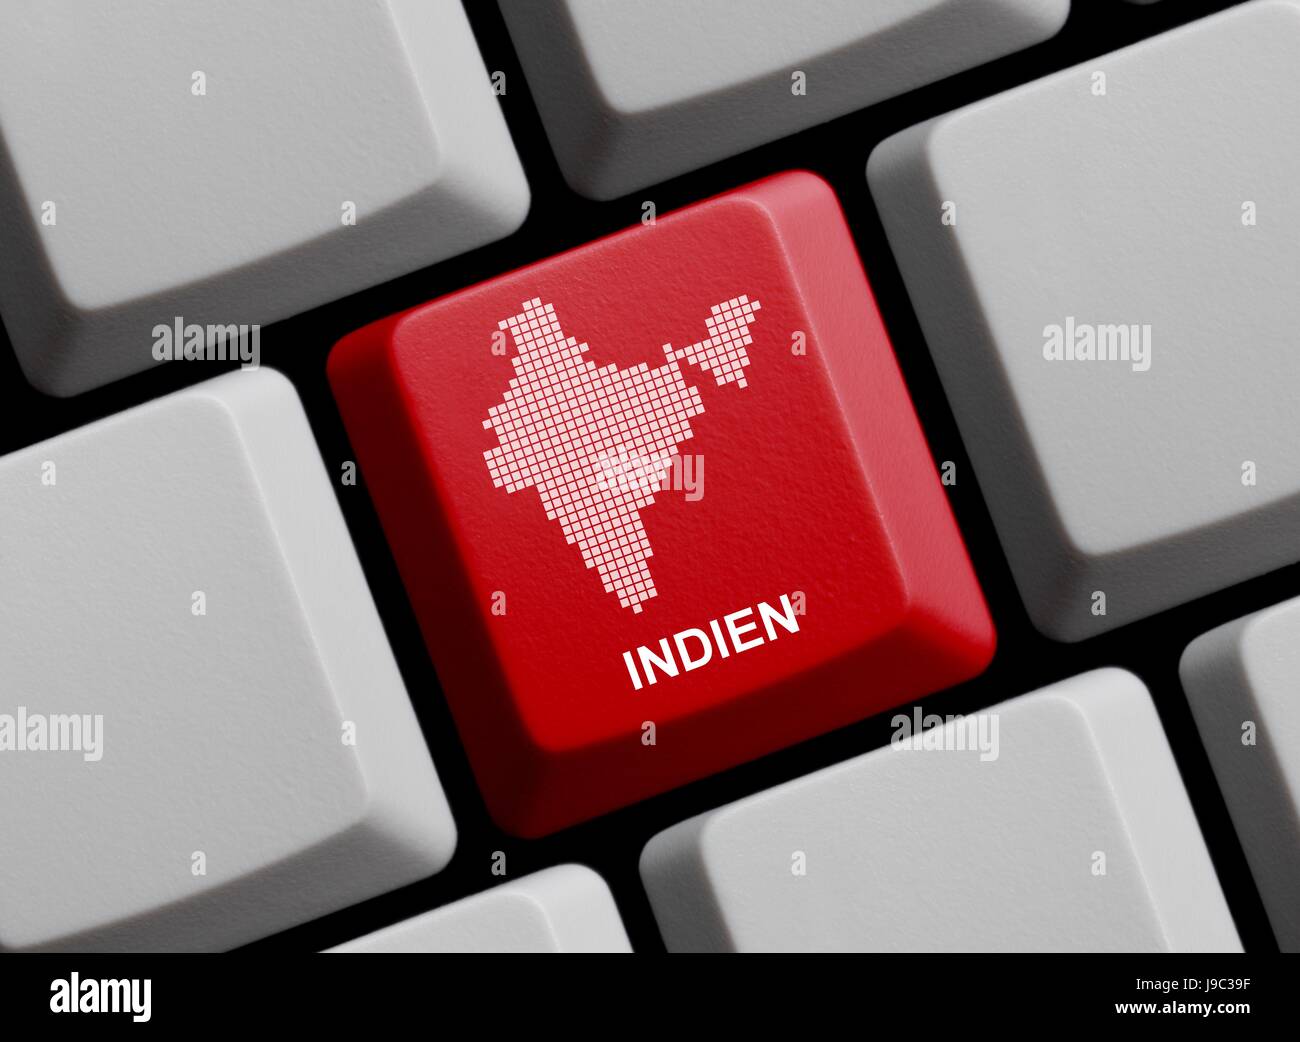 keyboard, india, card, outline, indian, atlas, map of the world, map, internet, Stock Photo